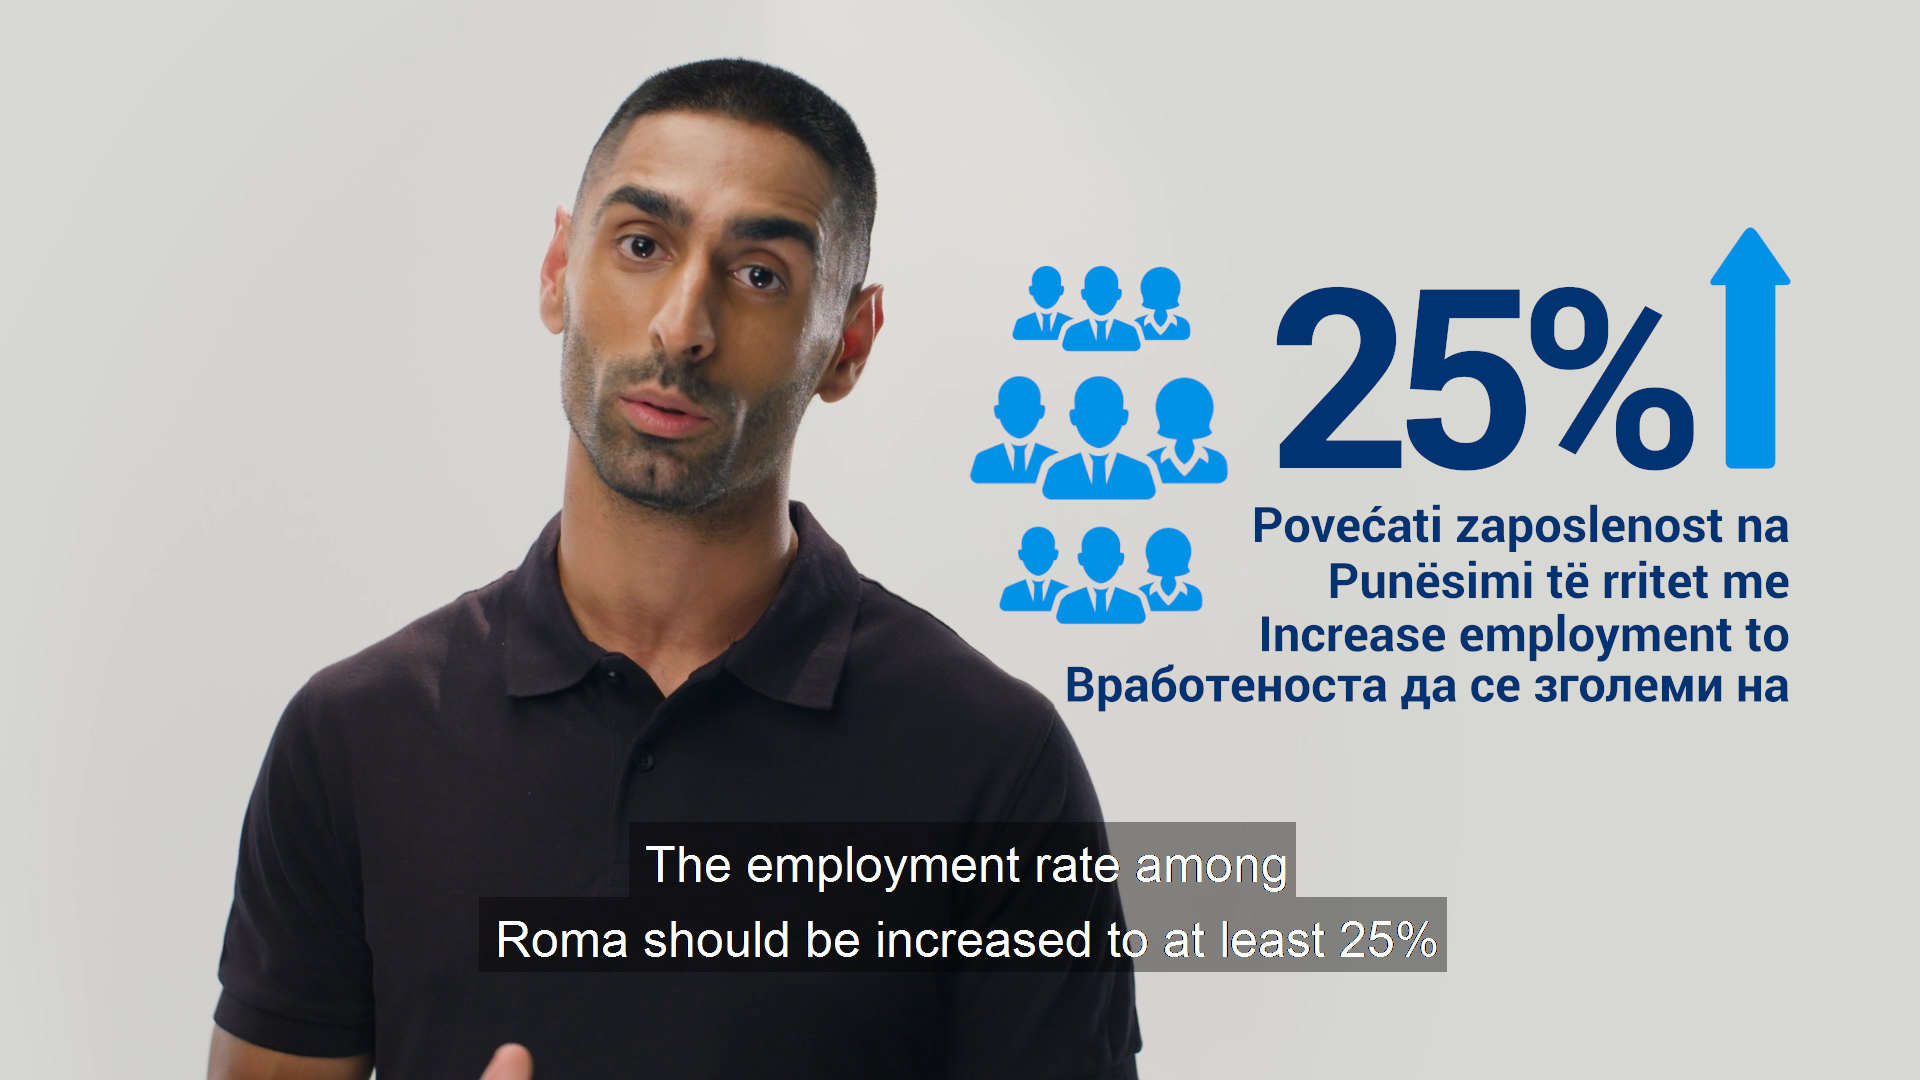 Treatment of Roma is an exam for us in the Western Balkans - are we fit for the EU?